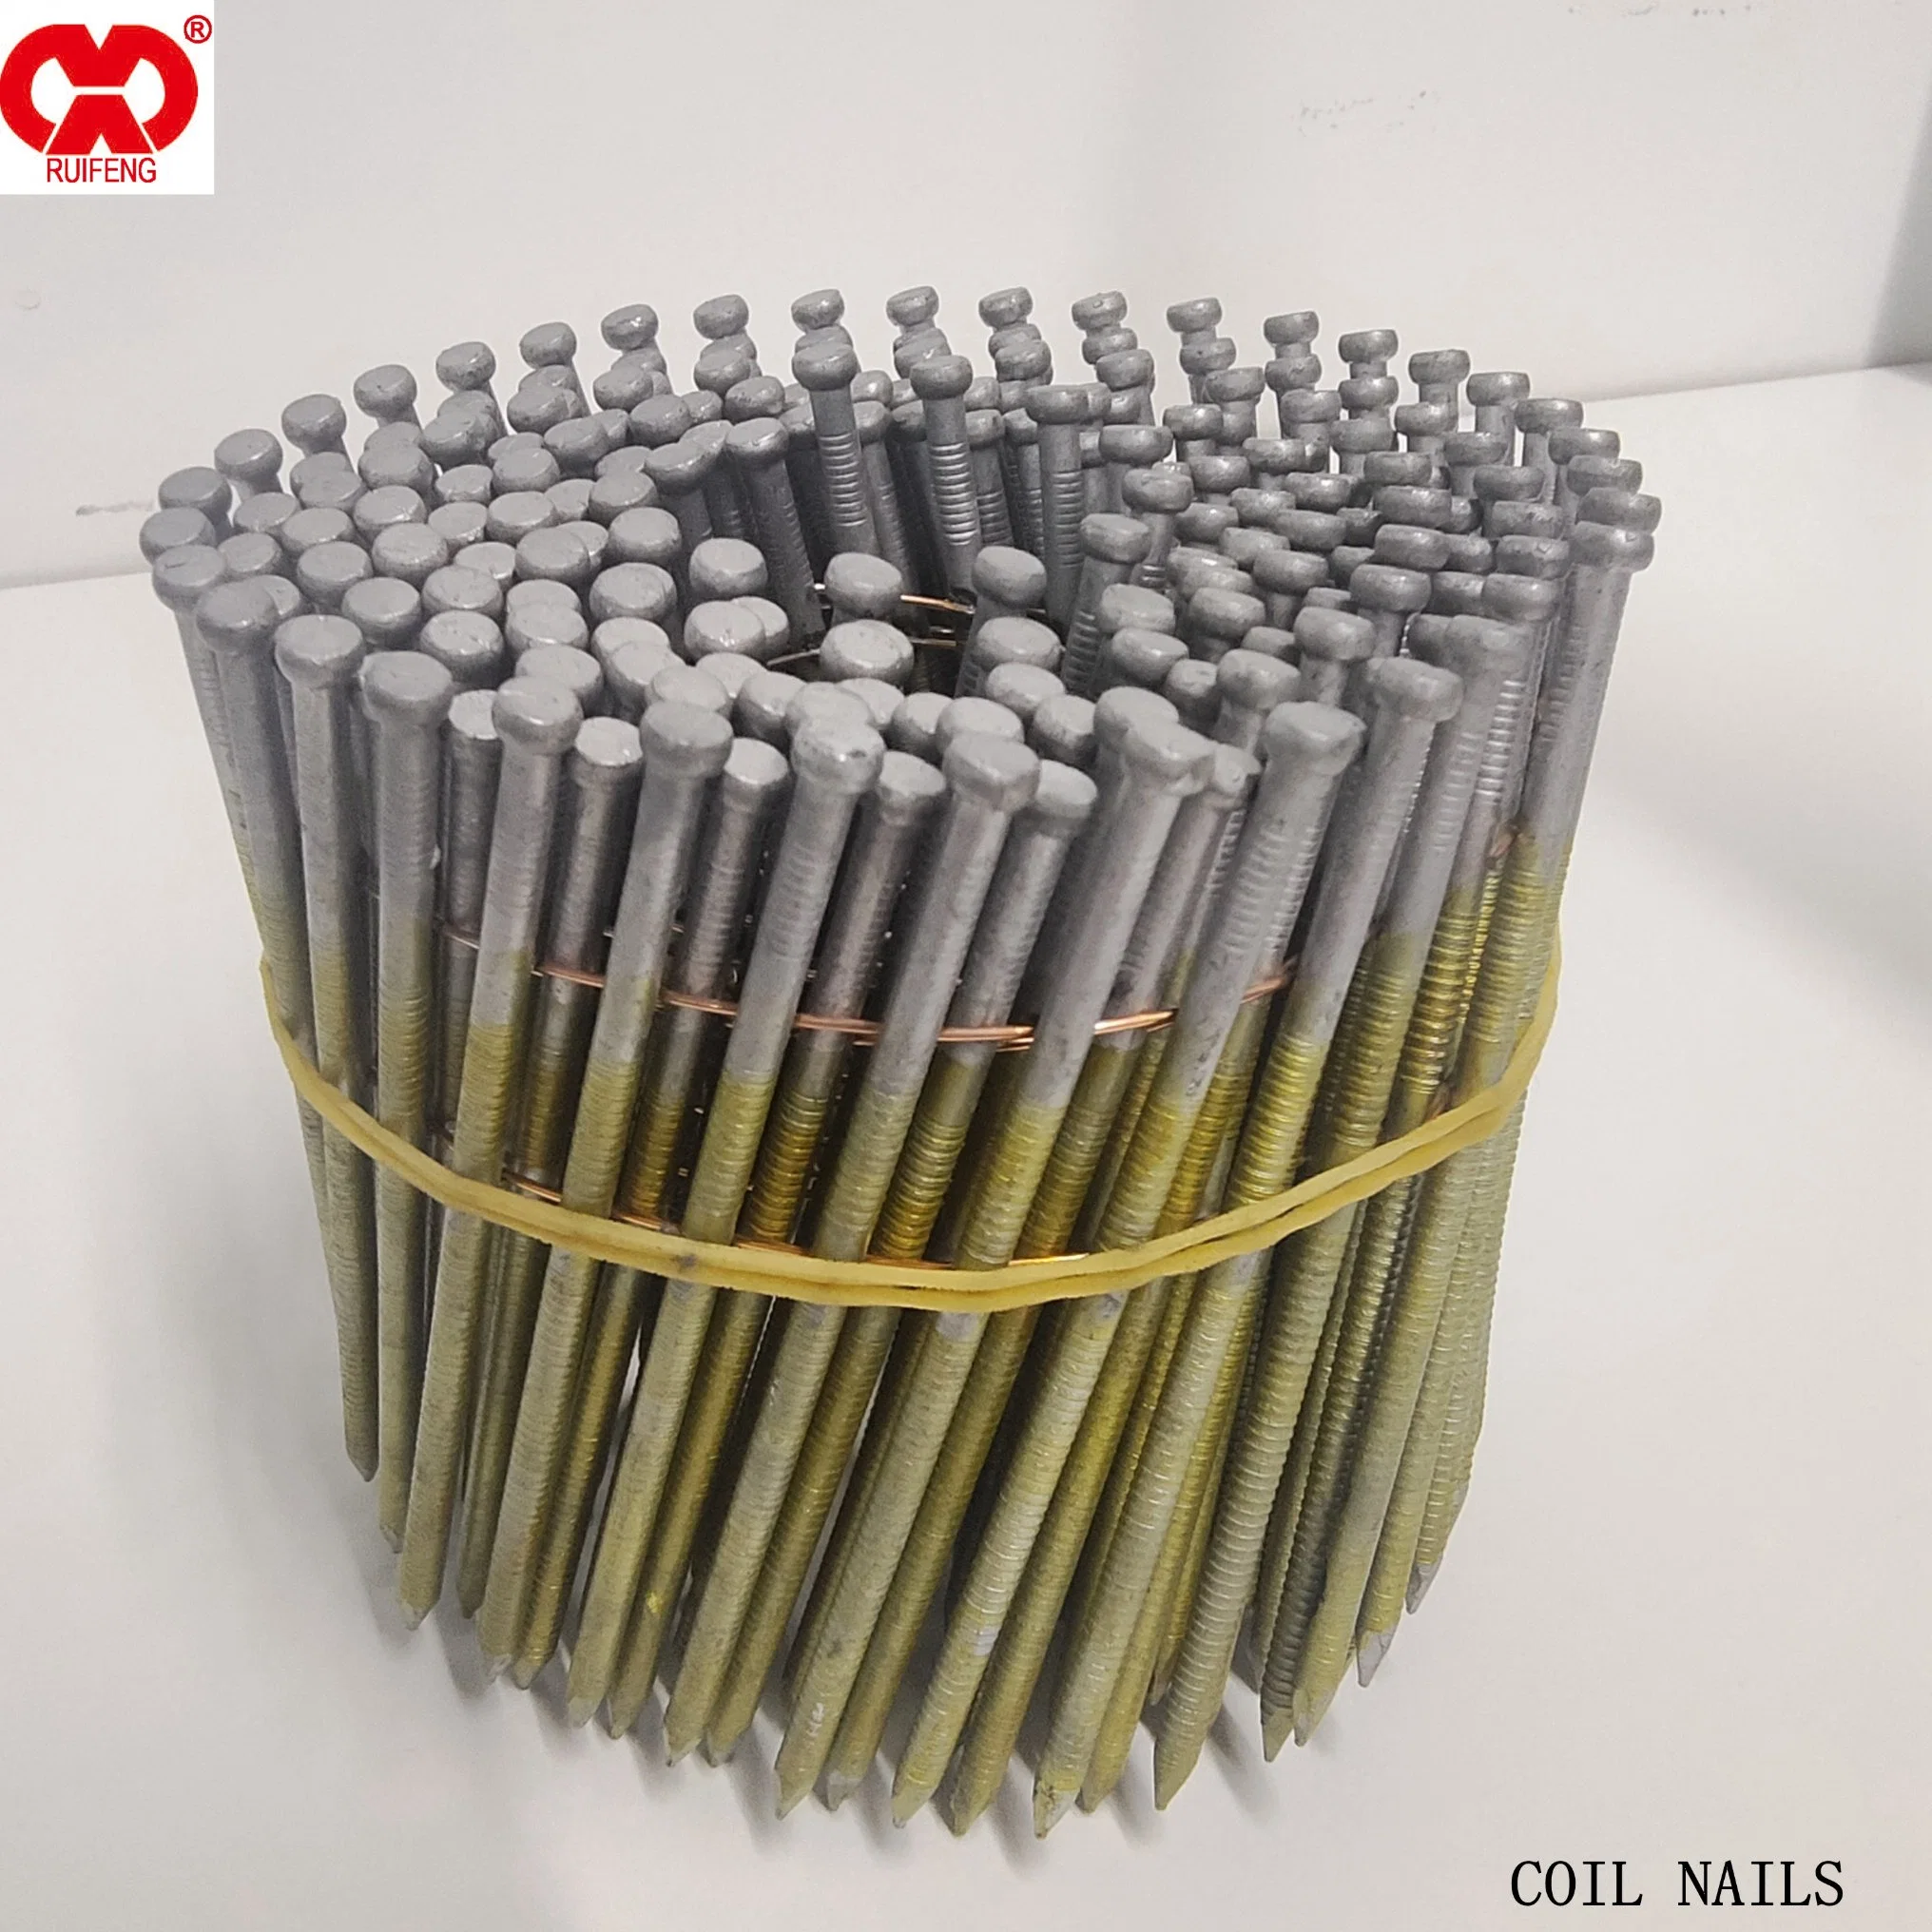 Latest Price Finish H. D. G. Wire Coil Nails, Dia 3.15mm Small Round Head Ring Shank Collated Nails in Anhui.